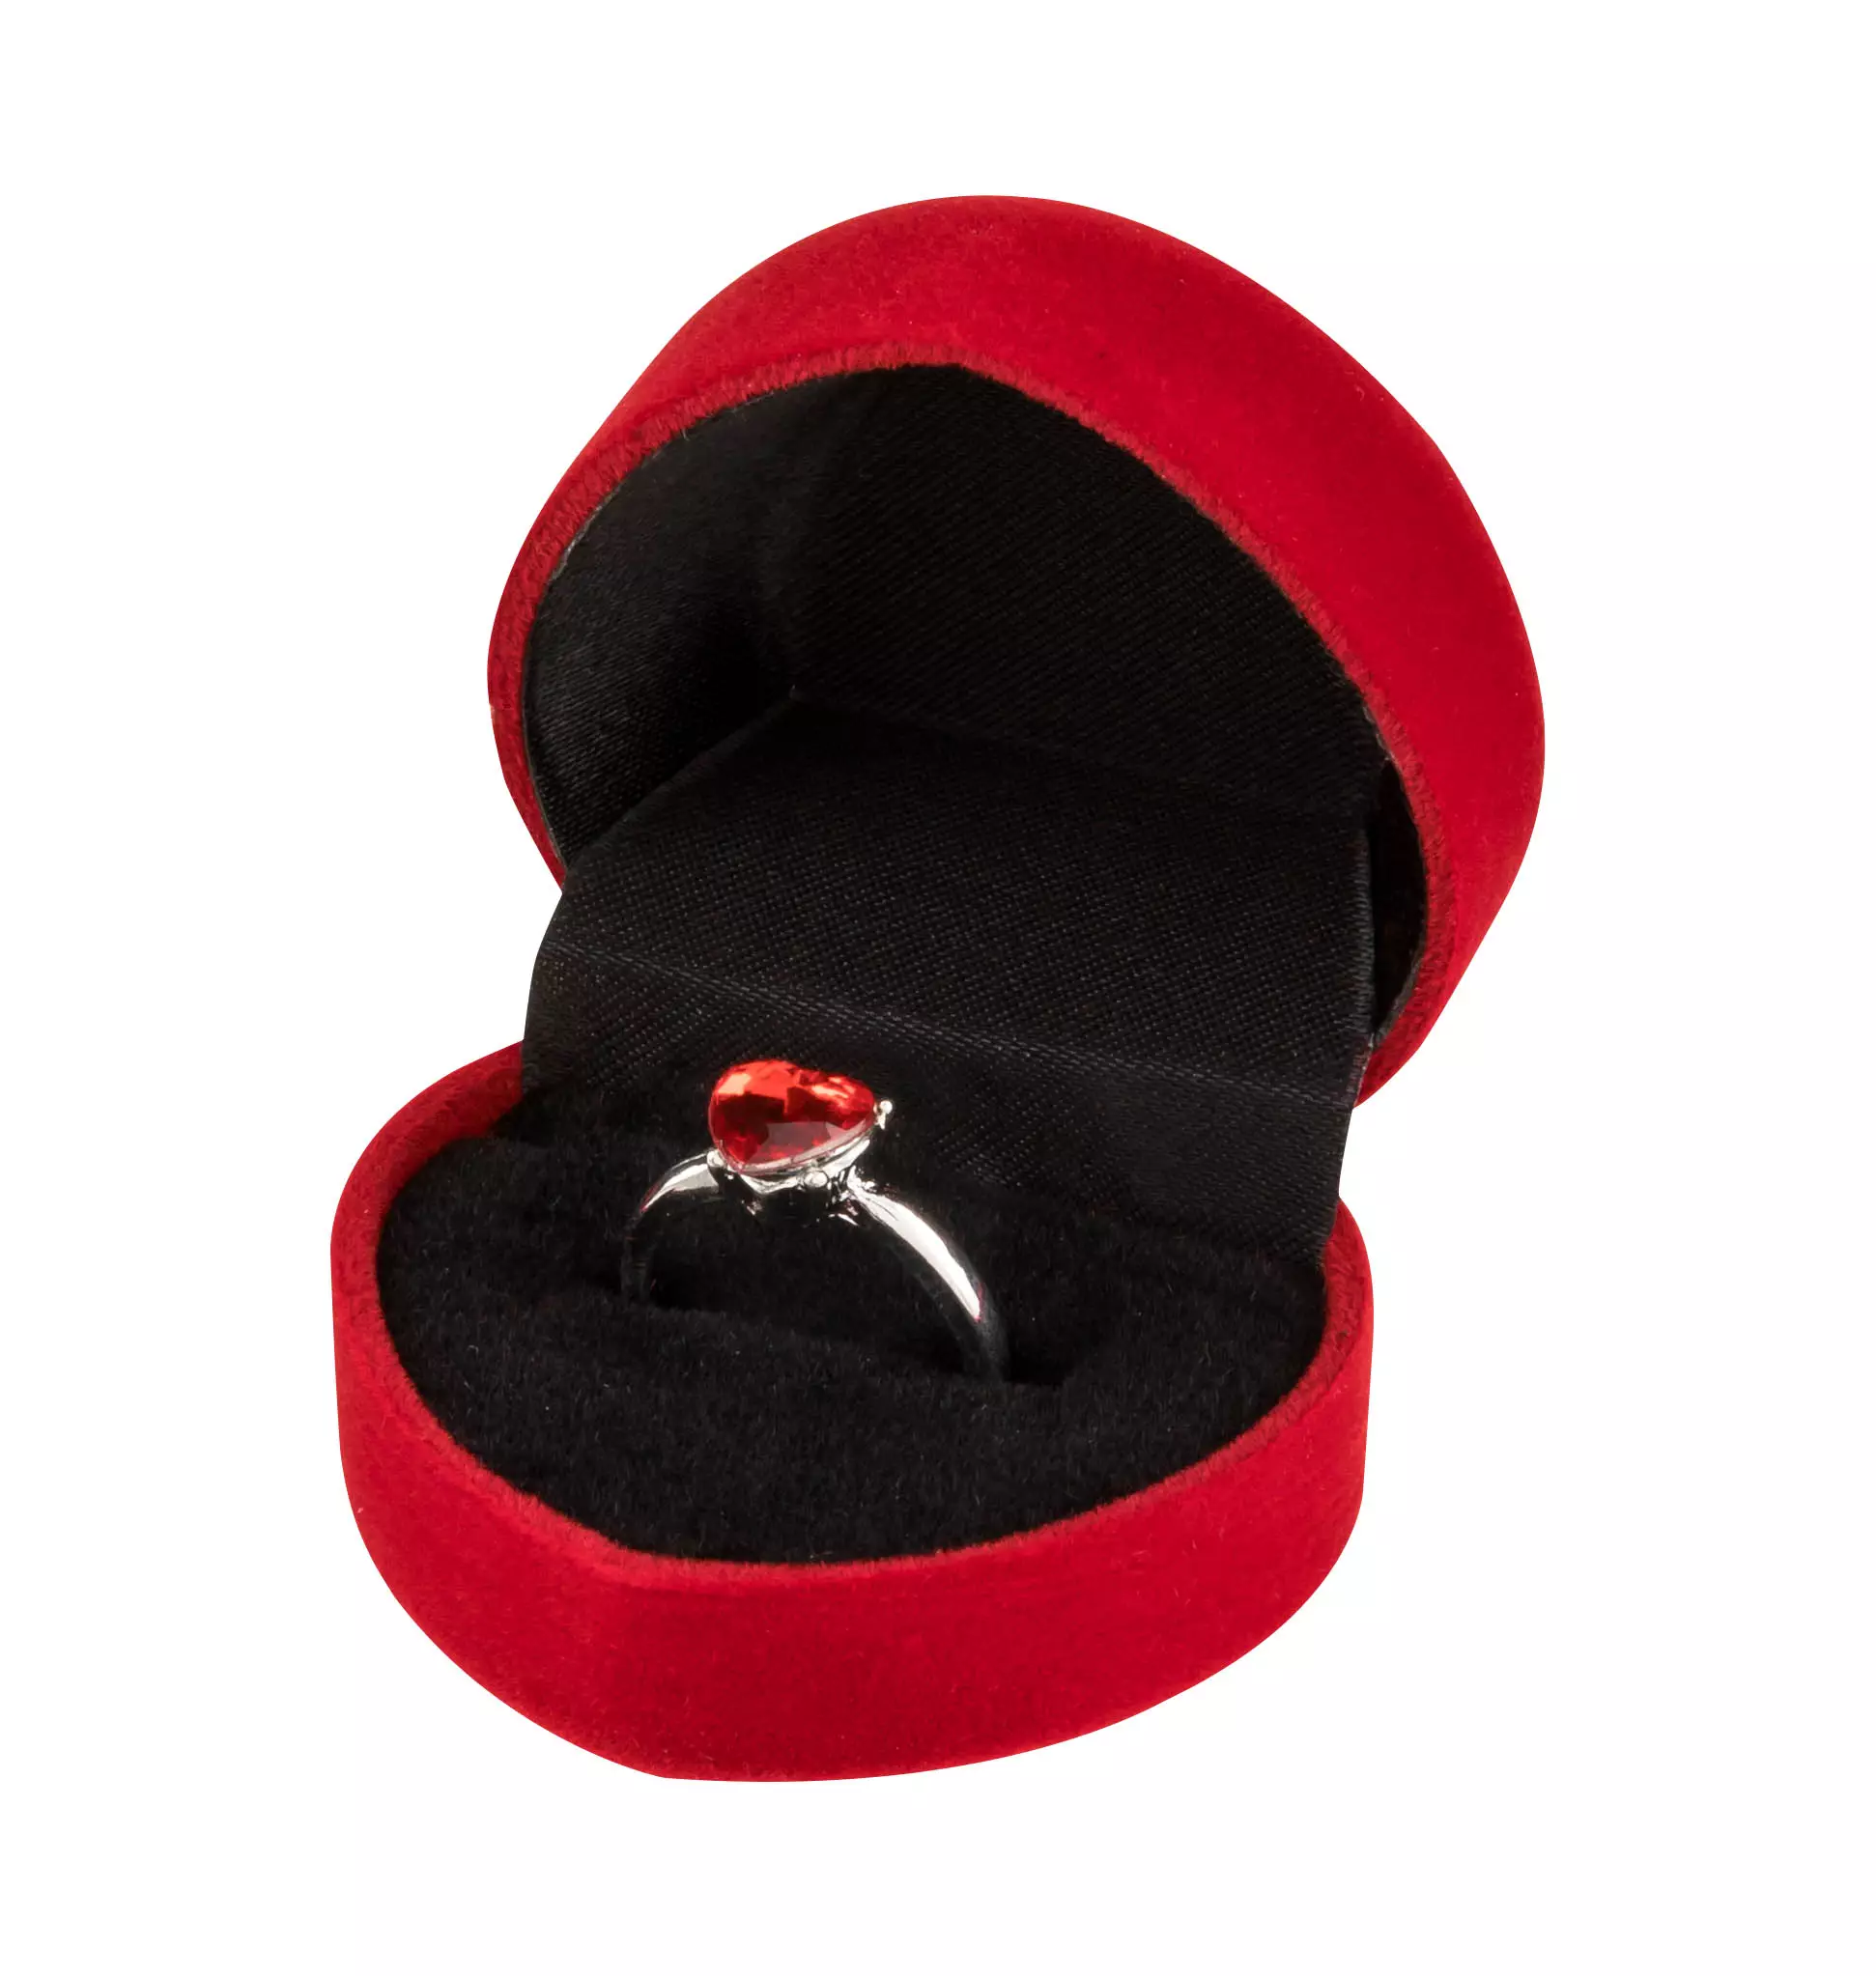 The rings come in a fancy red presentation box.